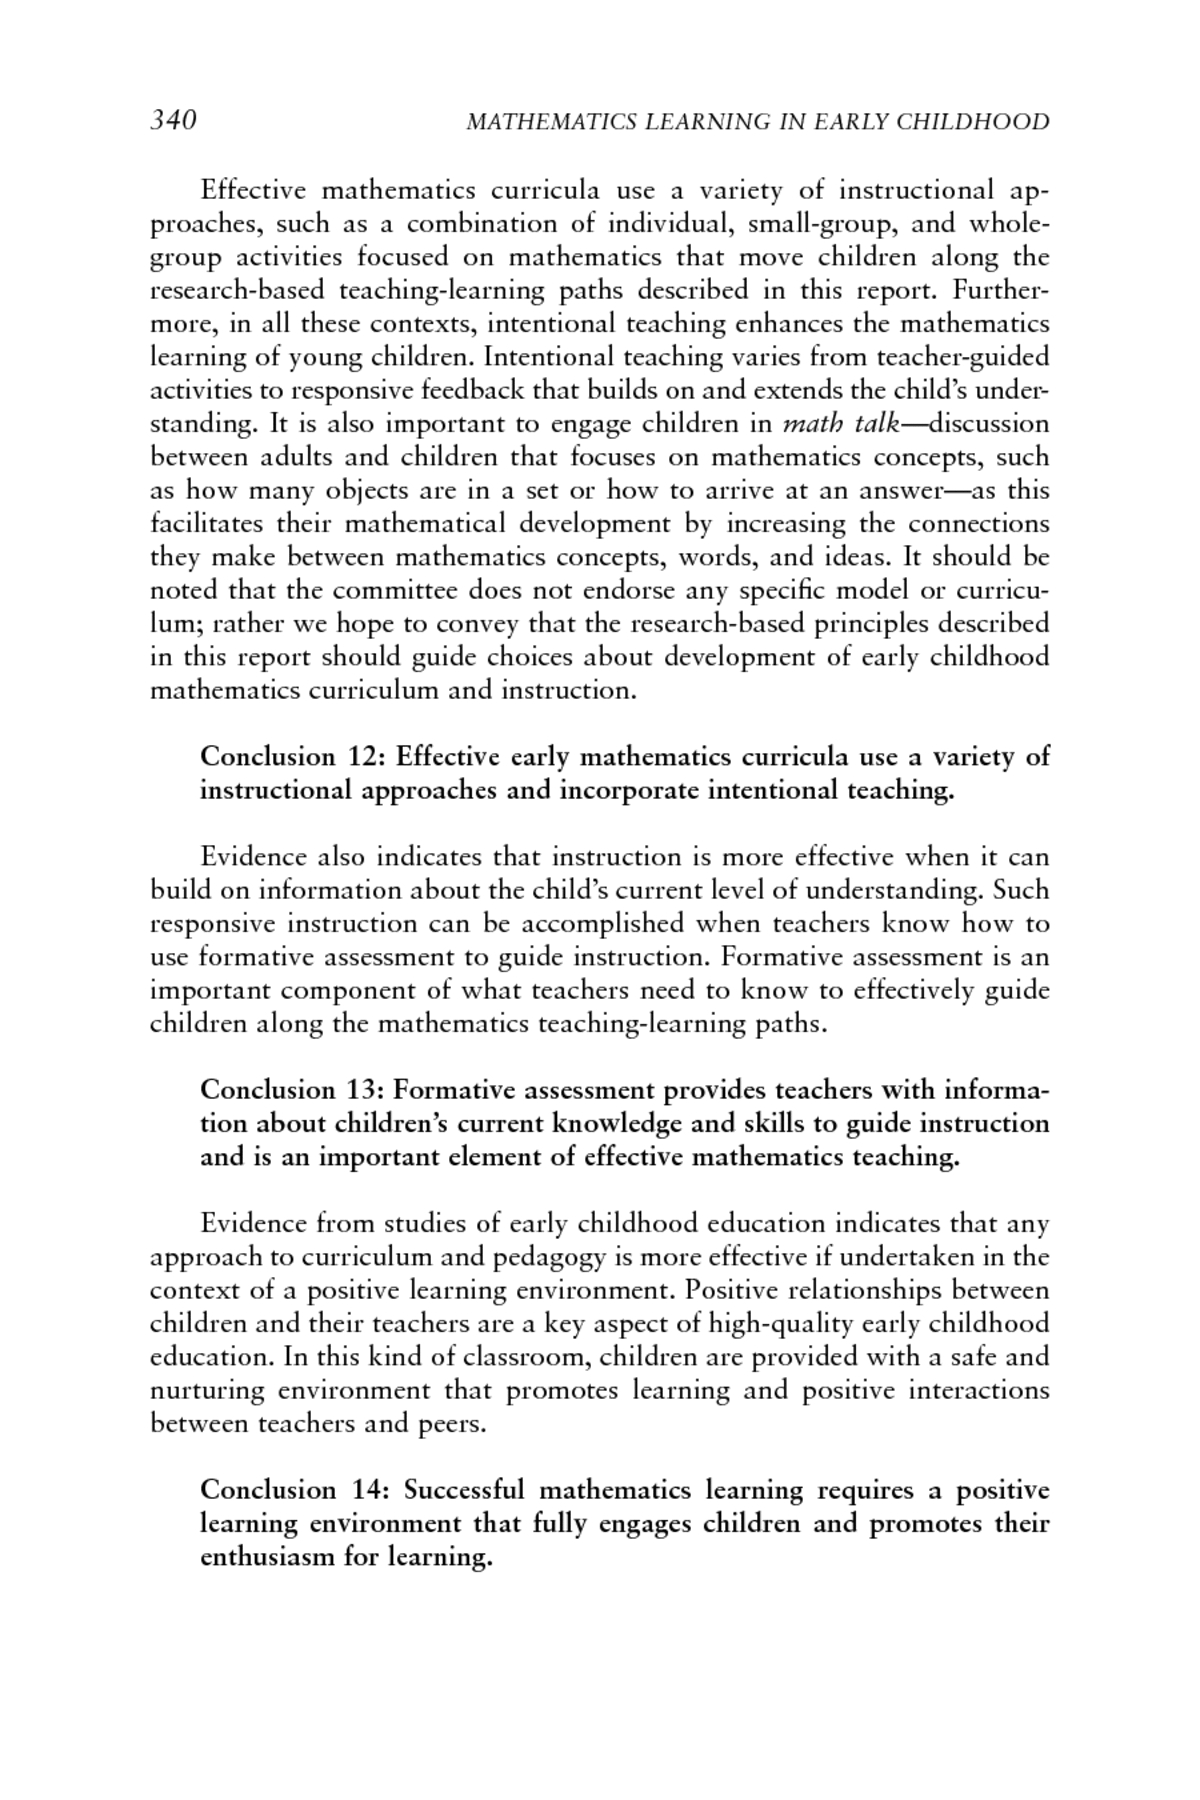 thesis statement examples for early childhood education